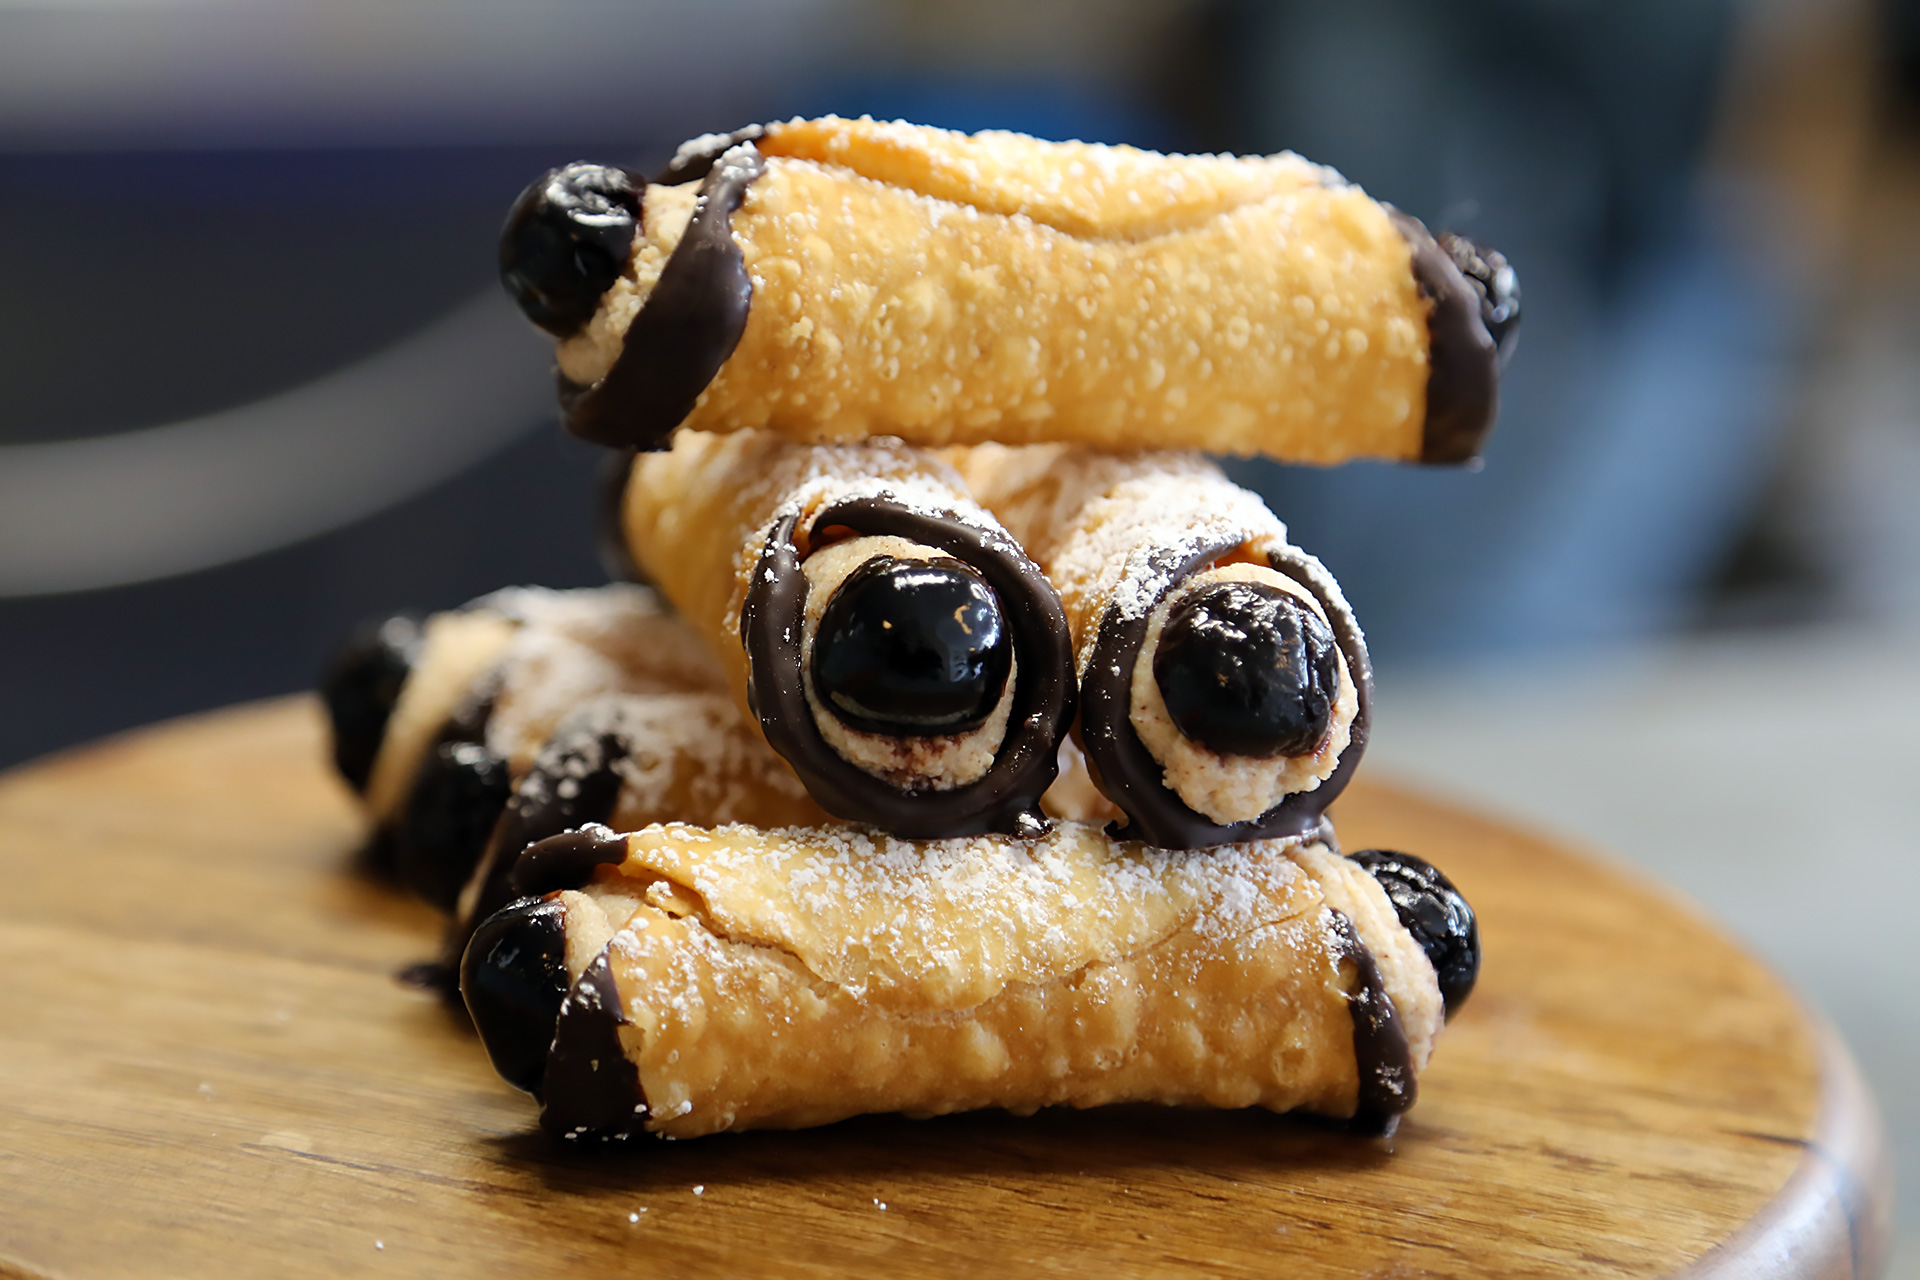 Chocolate-drizzled cannolis with Luxardo cherries dramatically peeking out of both ends.